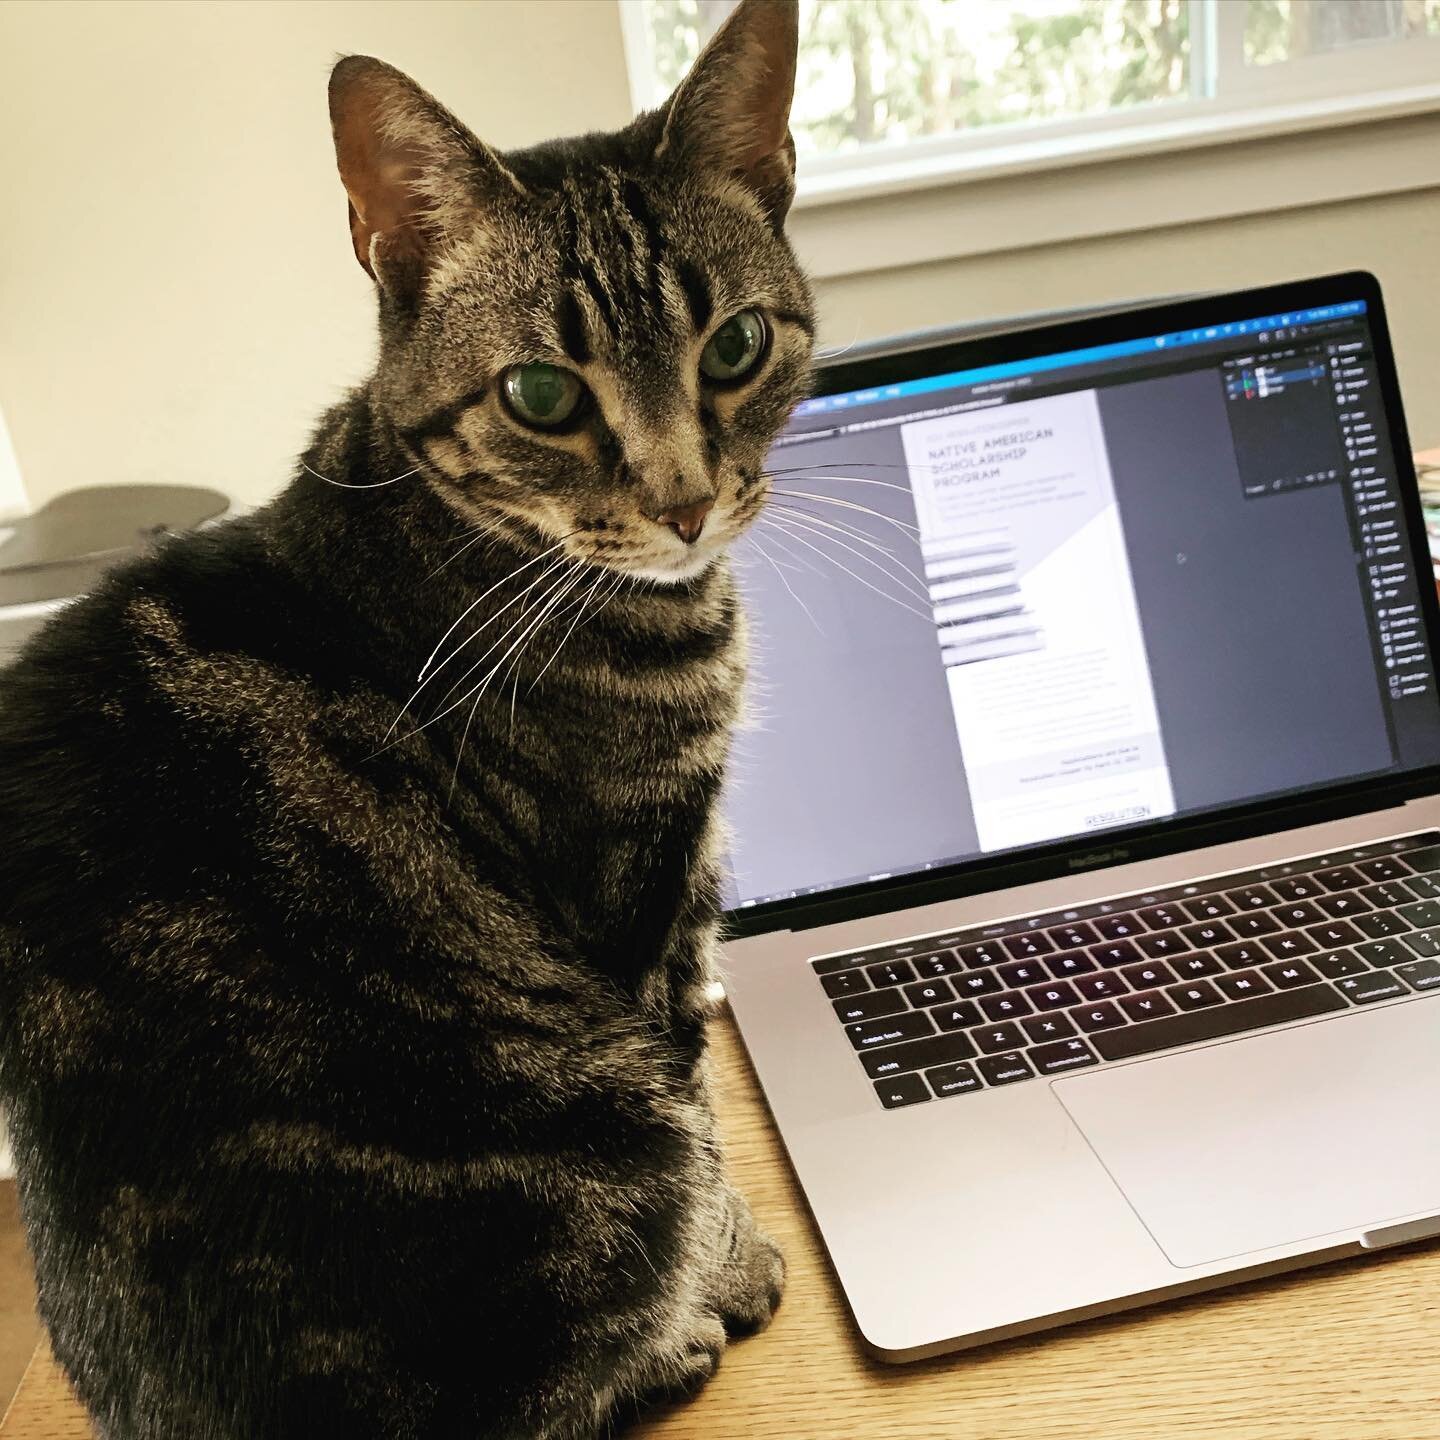 Hired a new design assistant! Lily cat is on it! 😸
:
:
#lunalilydesigns #graphicdesign #graphicdesigner #catasofinstagram #catstagram